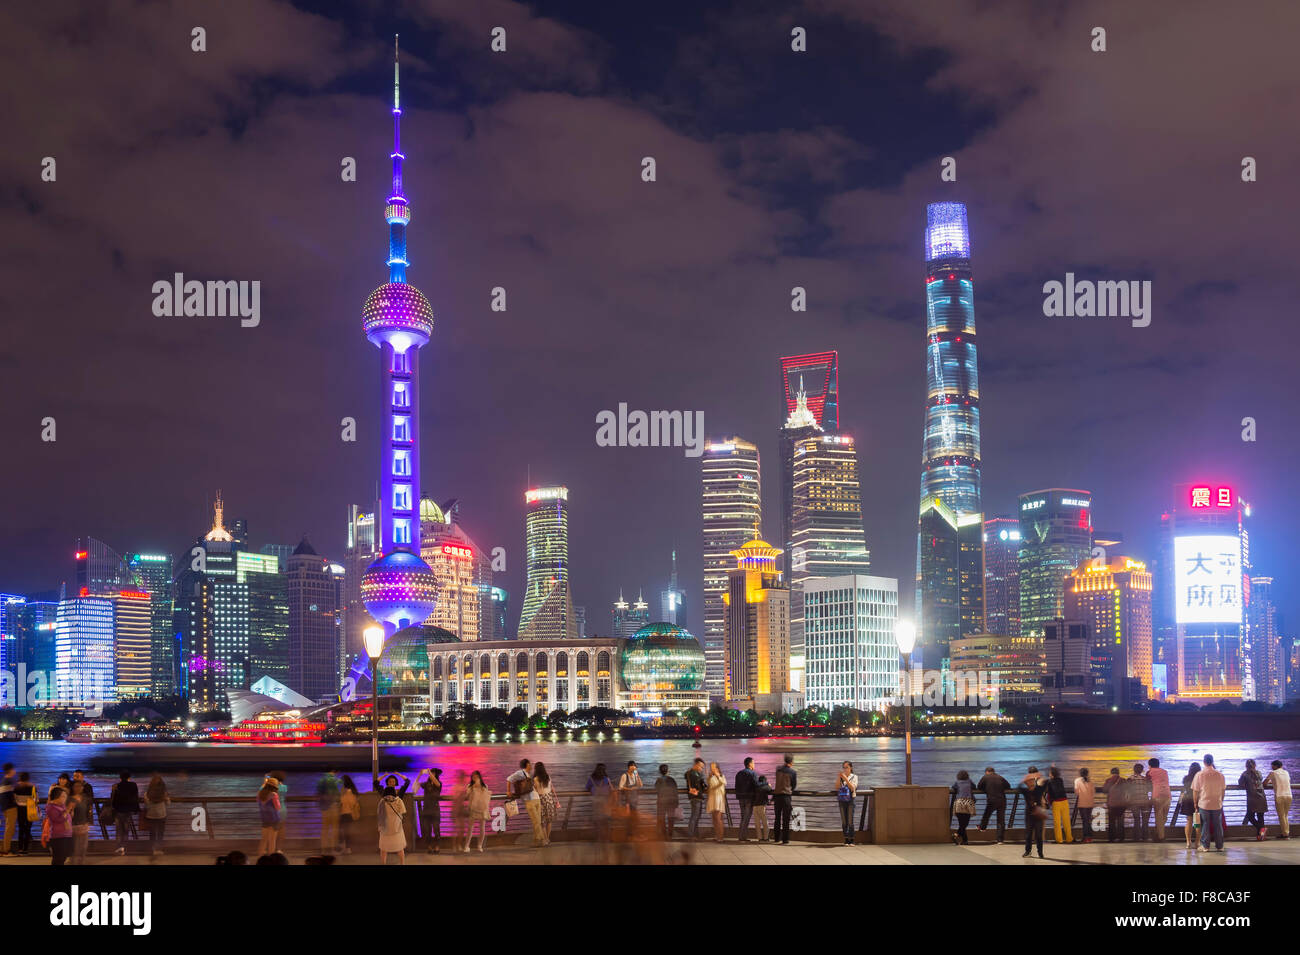 Pudong financial district skyline at night, Shanghai, China Stock Photo